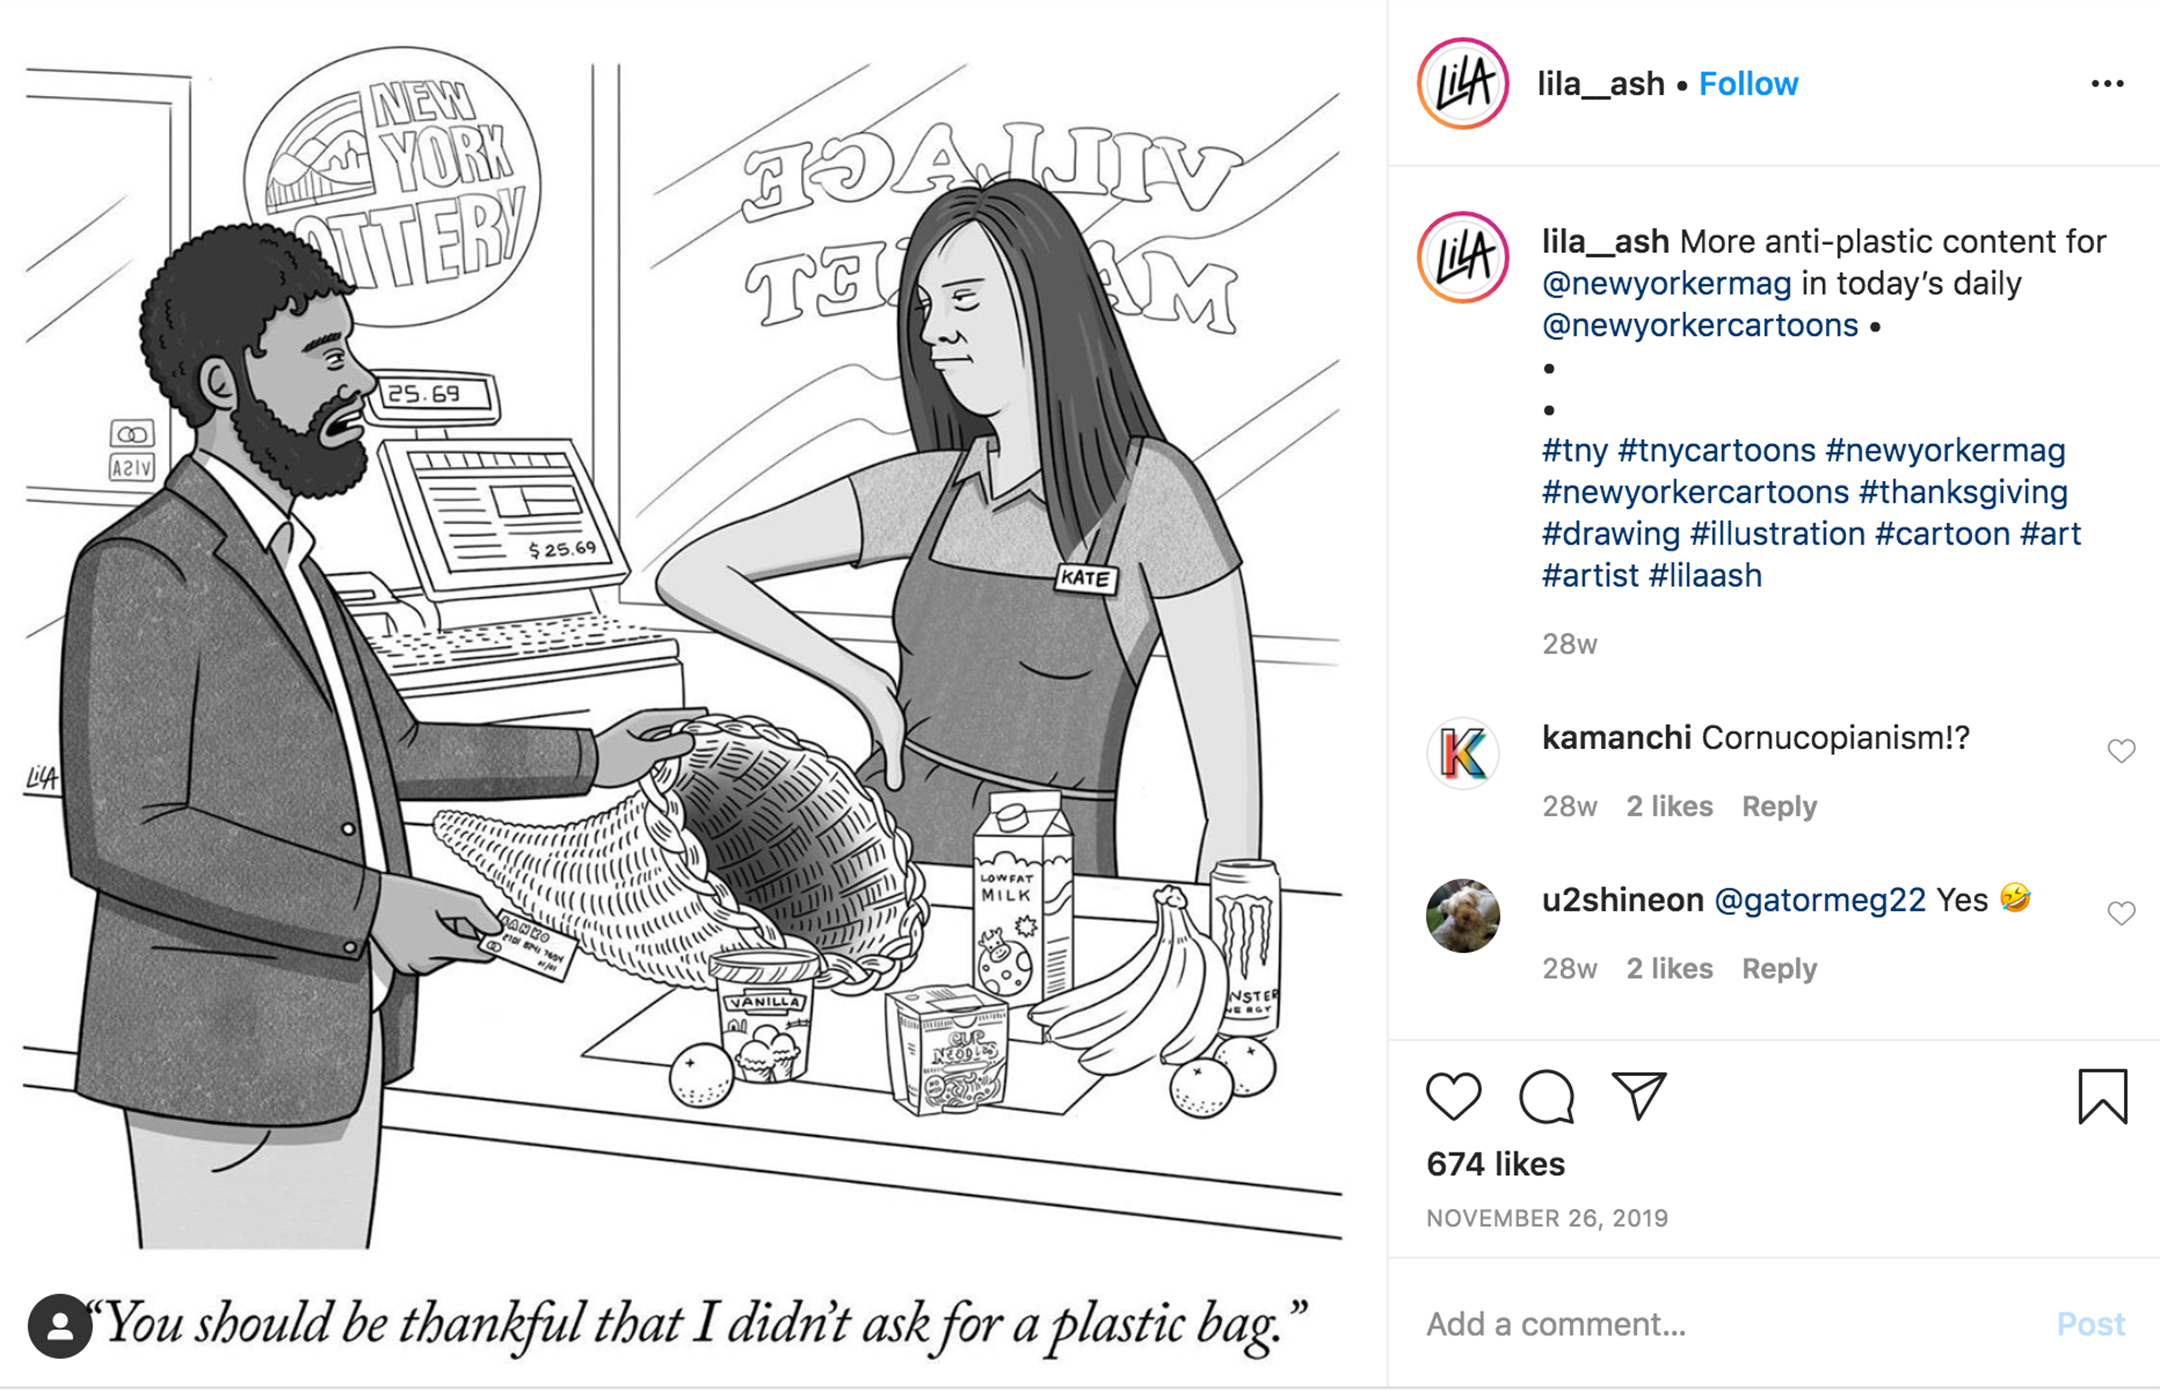 screenshot of an instragram page showing a cartoon of a man placing recently purchased groceries into a cornucopia horn